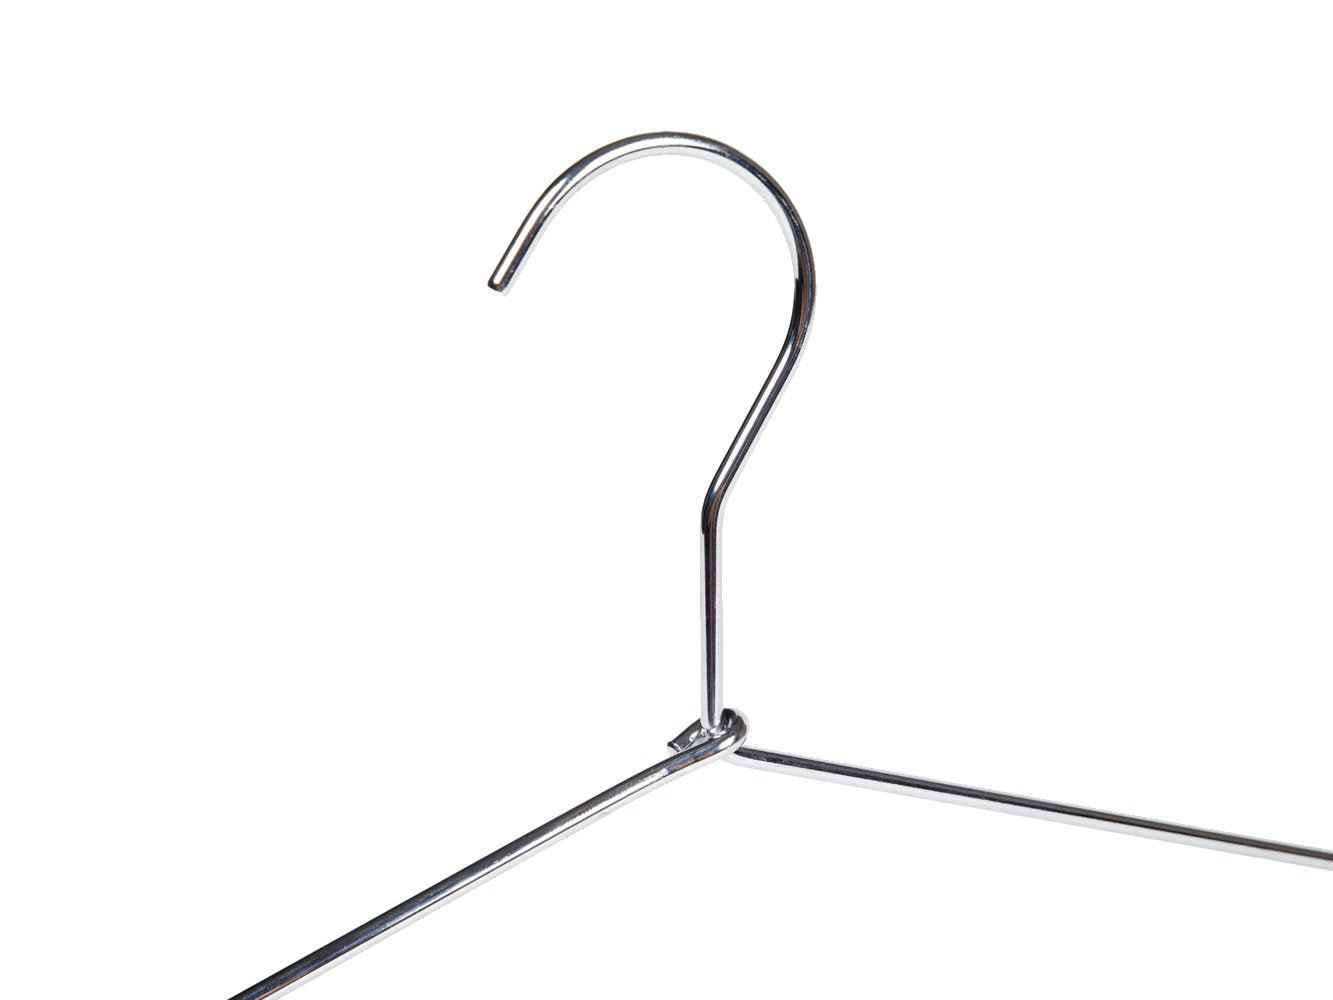 Quality Hangers Heavy Duty Metal Suit Hanger Coat Hangers with Polished Chrome (8 Pack)  - Like New